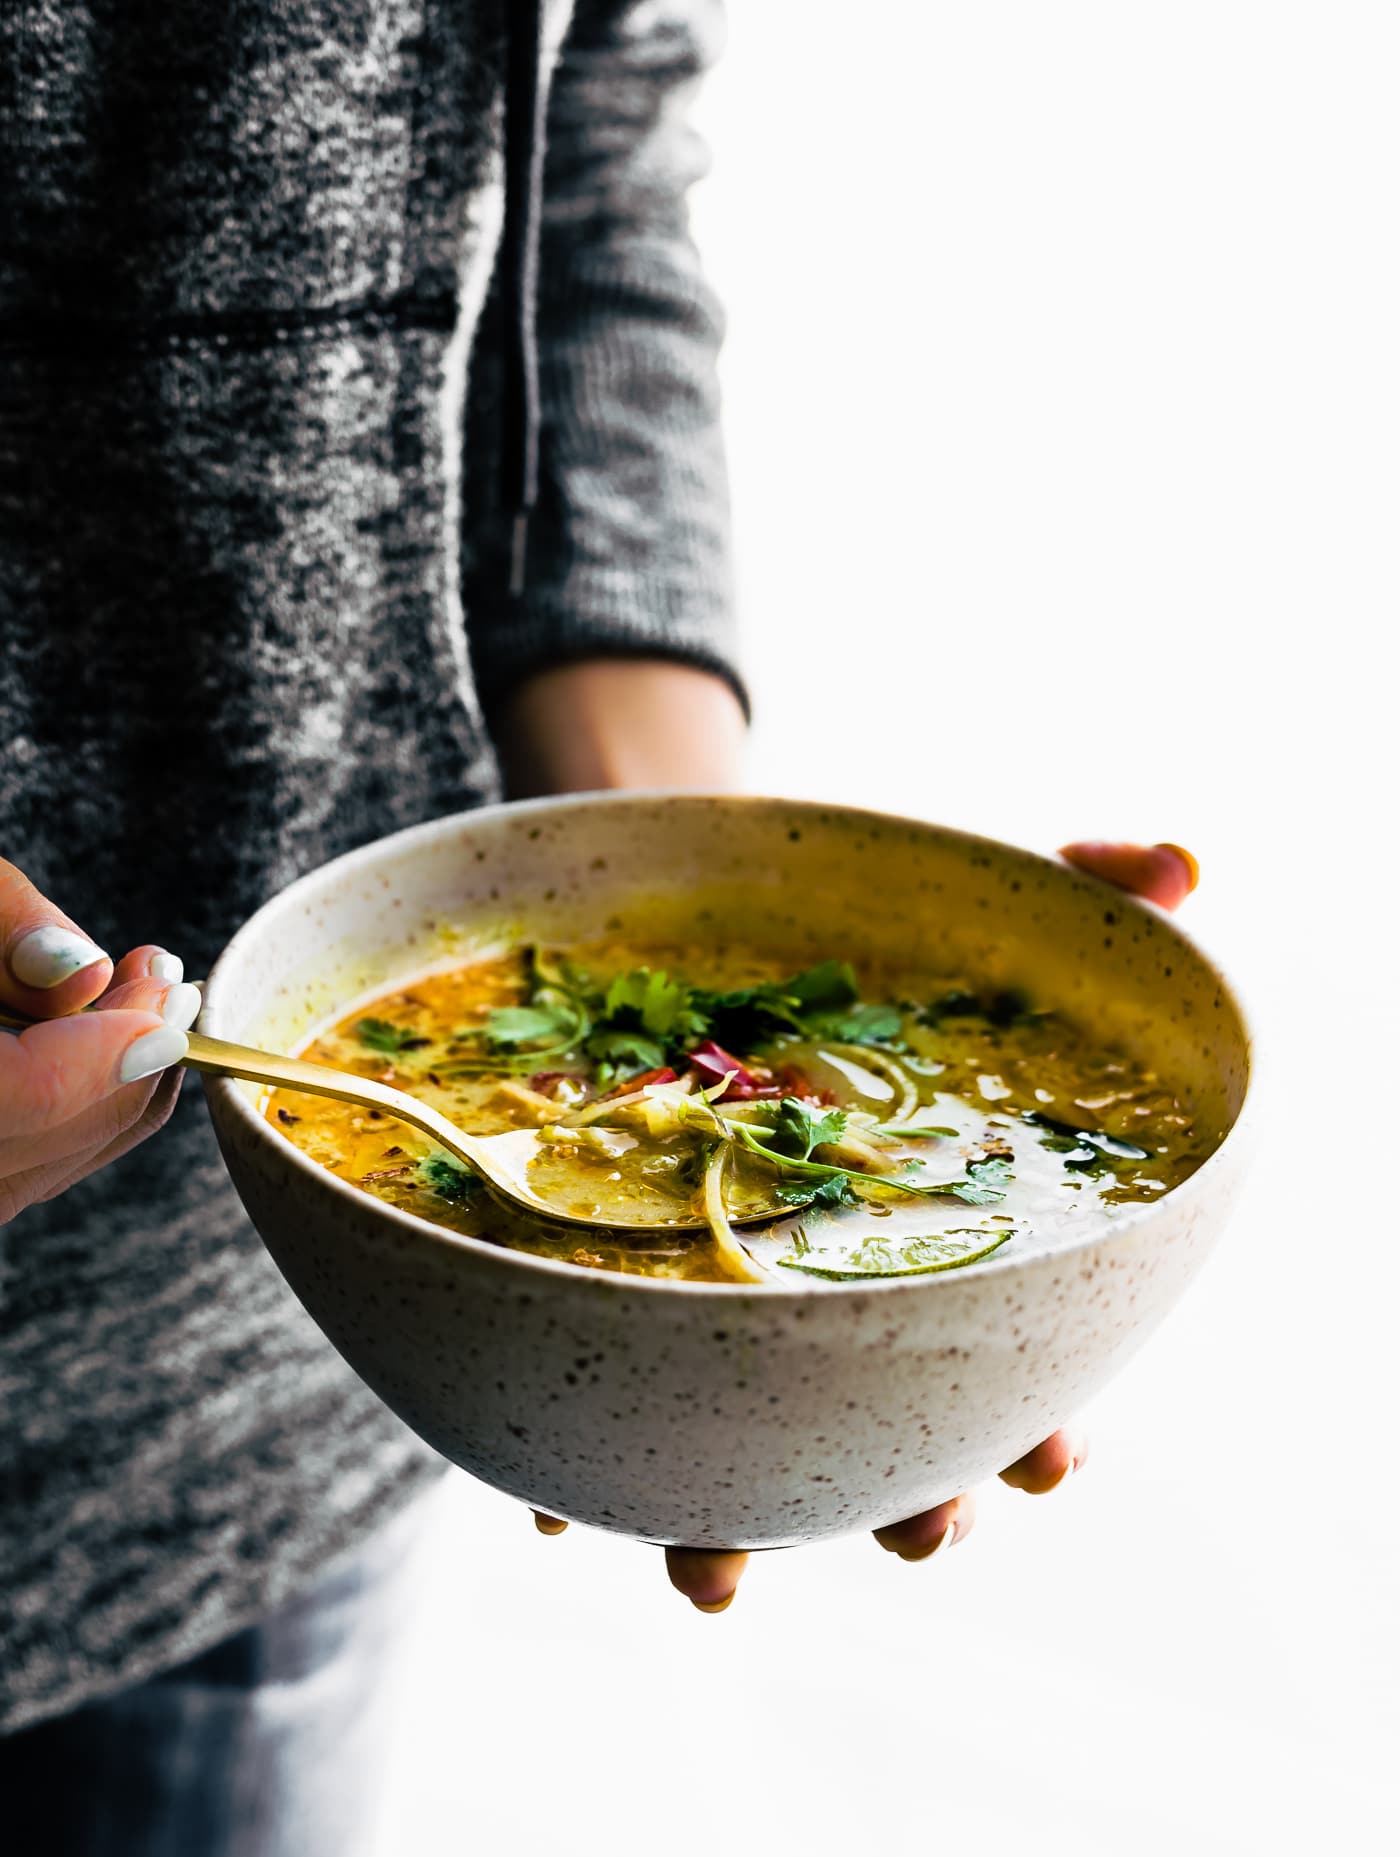 Easy Thai coconut soup with coconut milk and cabbage. This nourishing Thai soup is quick to make with simple ingredients. Low Carb, Paleo & Vegan friendly.